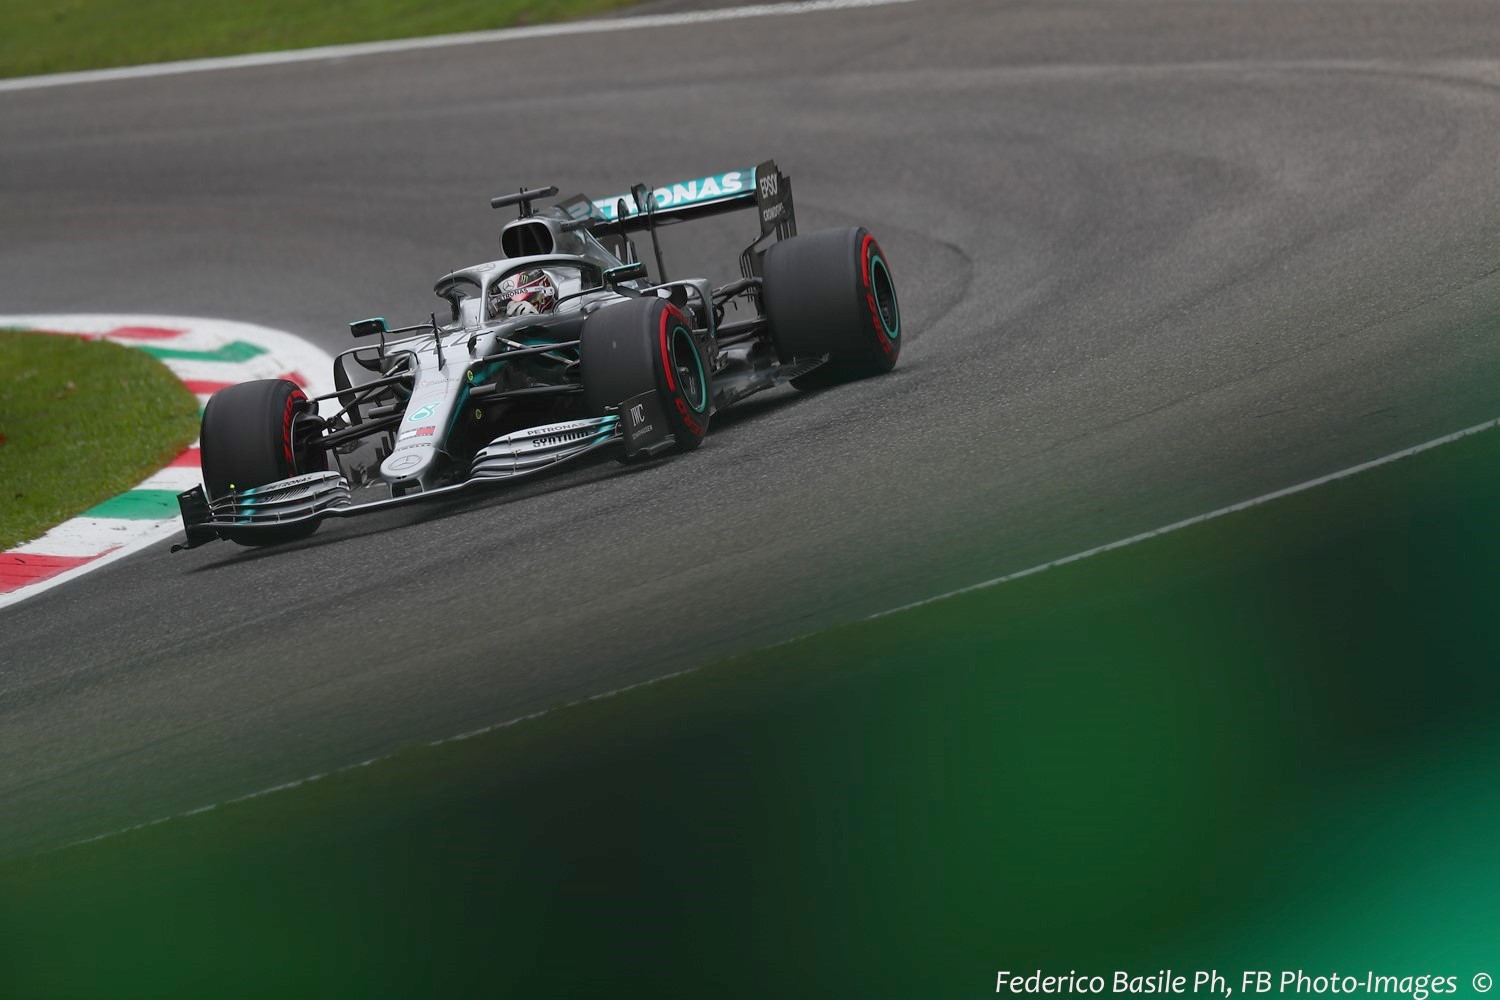 How bad will Mercedes beat Ferrari on their home turf this year? It won't be pretty